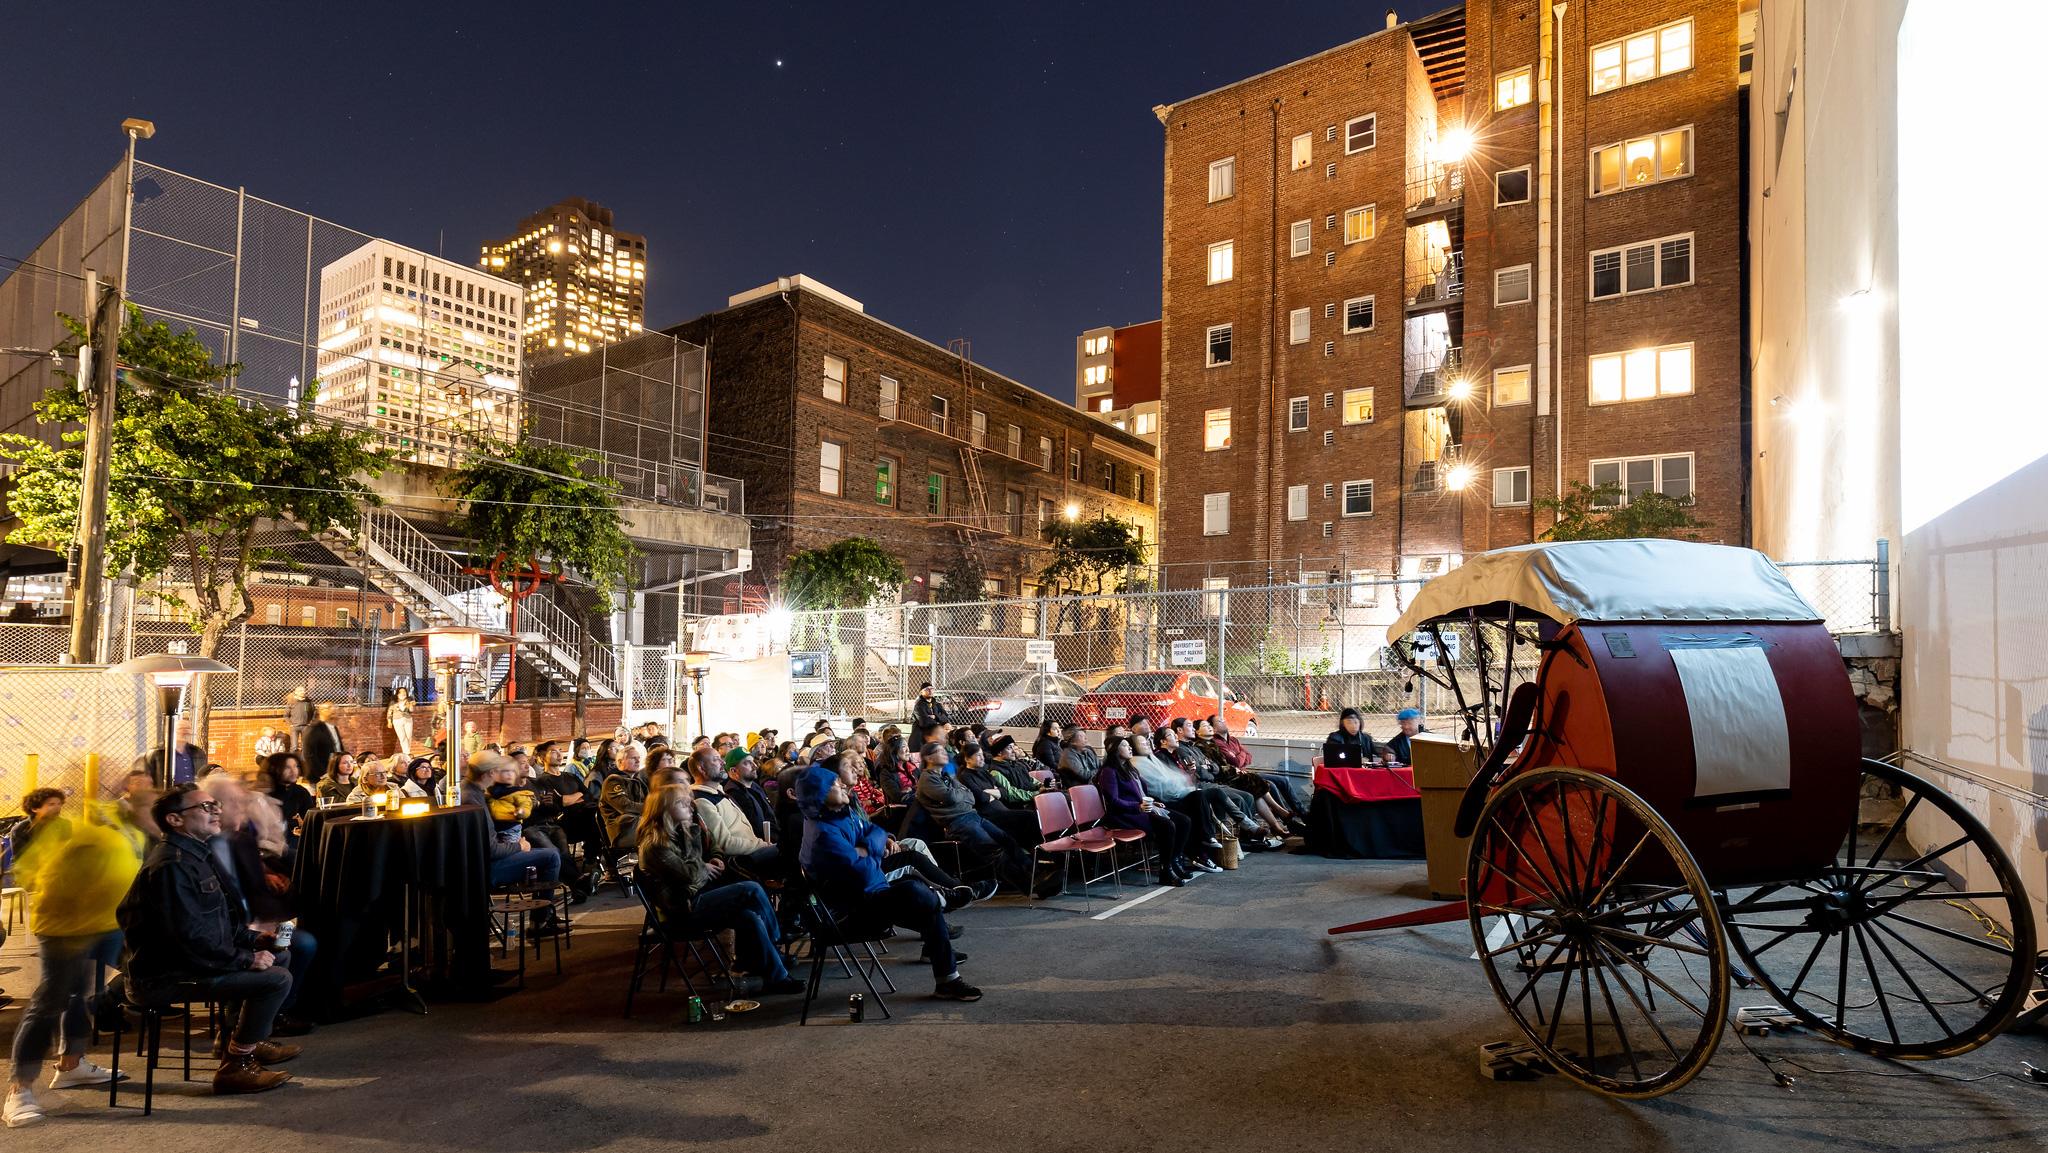 The Hong Kong Economic and Trade Office in San Francisco partnered with the Chinese Historical Society of America for a film series, "Radiating Bruce Lee: Cinema Under The Sky", in San Francisco. Photo shows the outdoor screening of "Red Heroine", accompanied by a live soundtrack performance, which was well received on October 22 (San Francisco time).